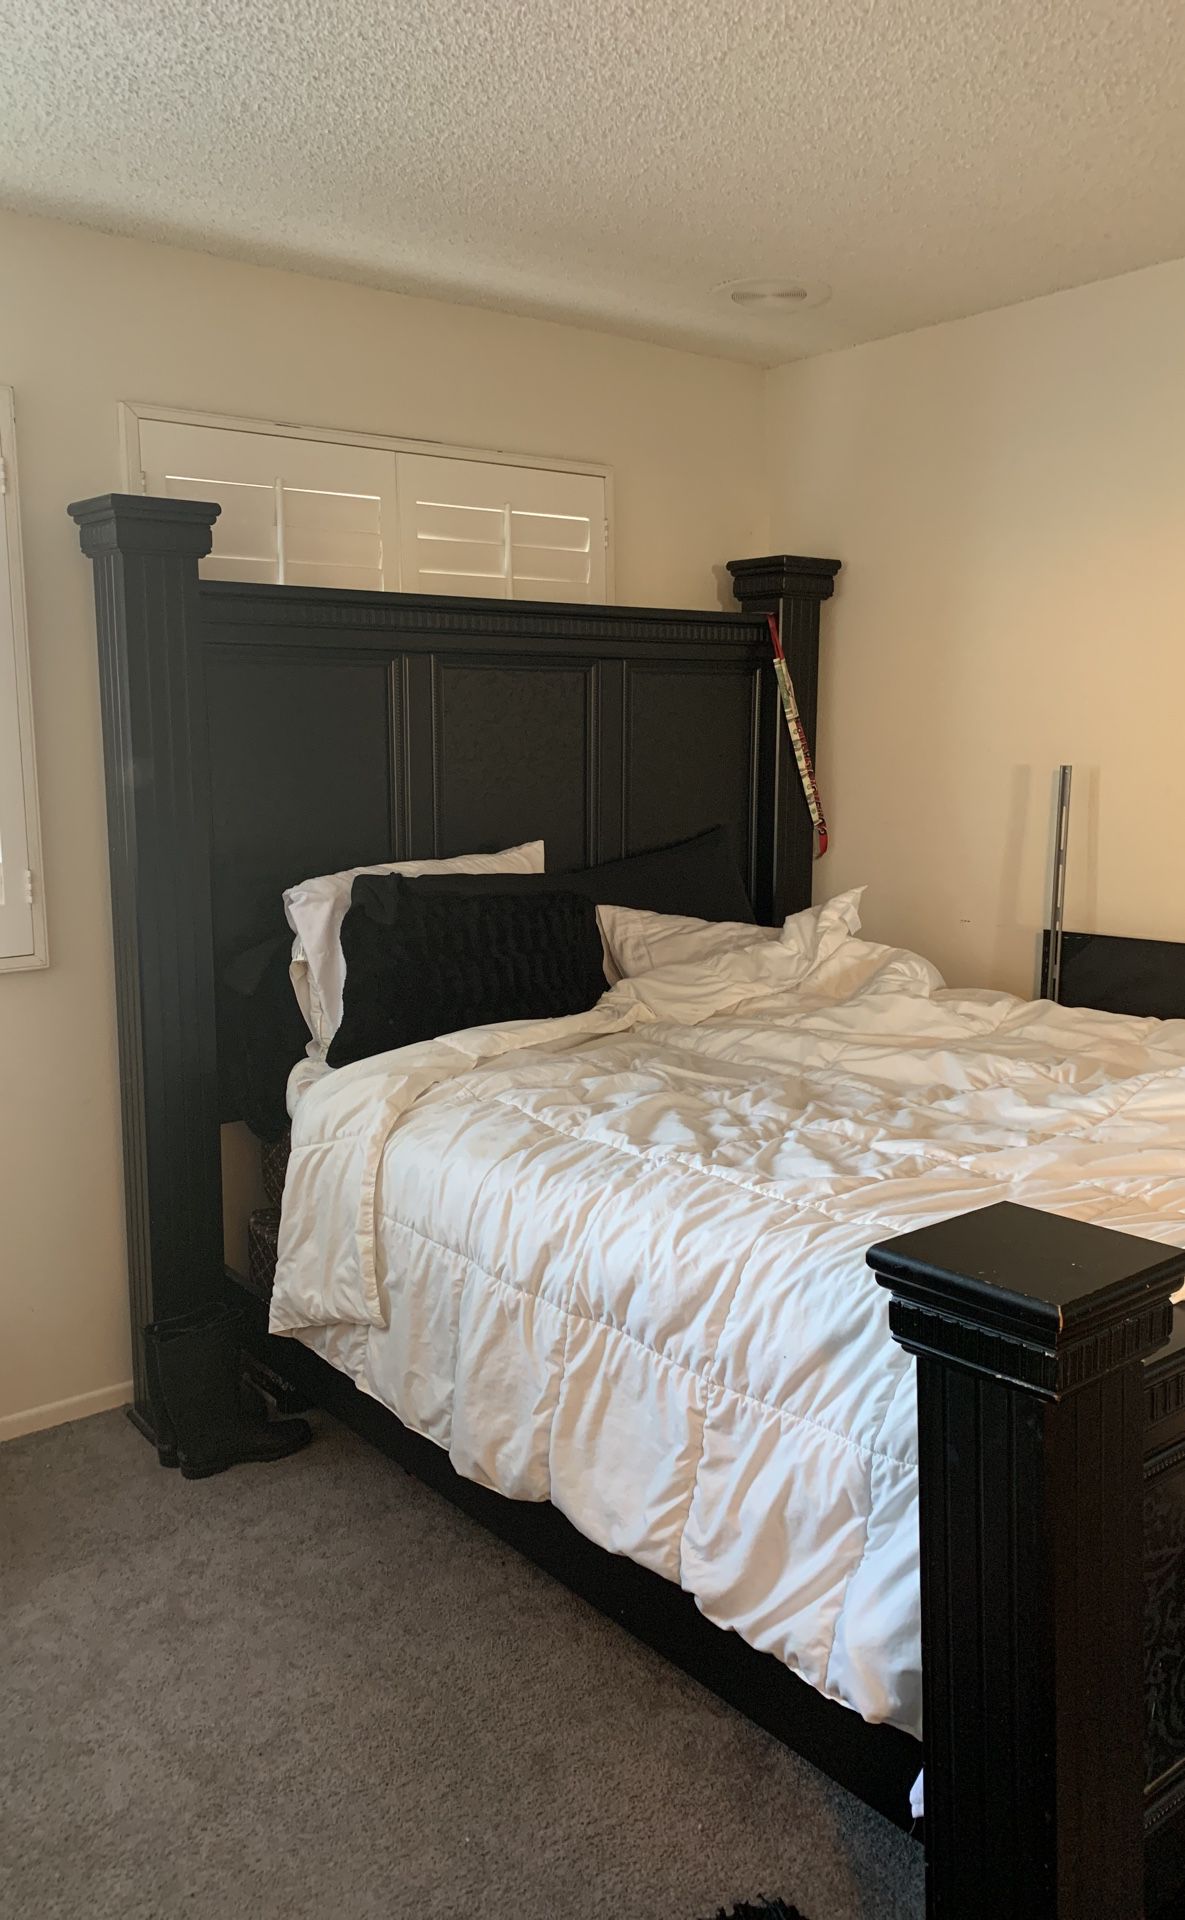 MOVE OUT QUEEN BEDROOM SET SALE ASAP $500 EVERYTHING INCLUDED